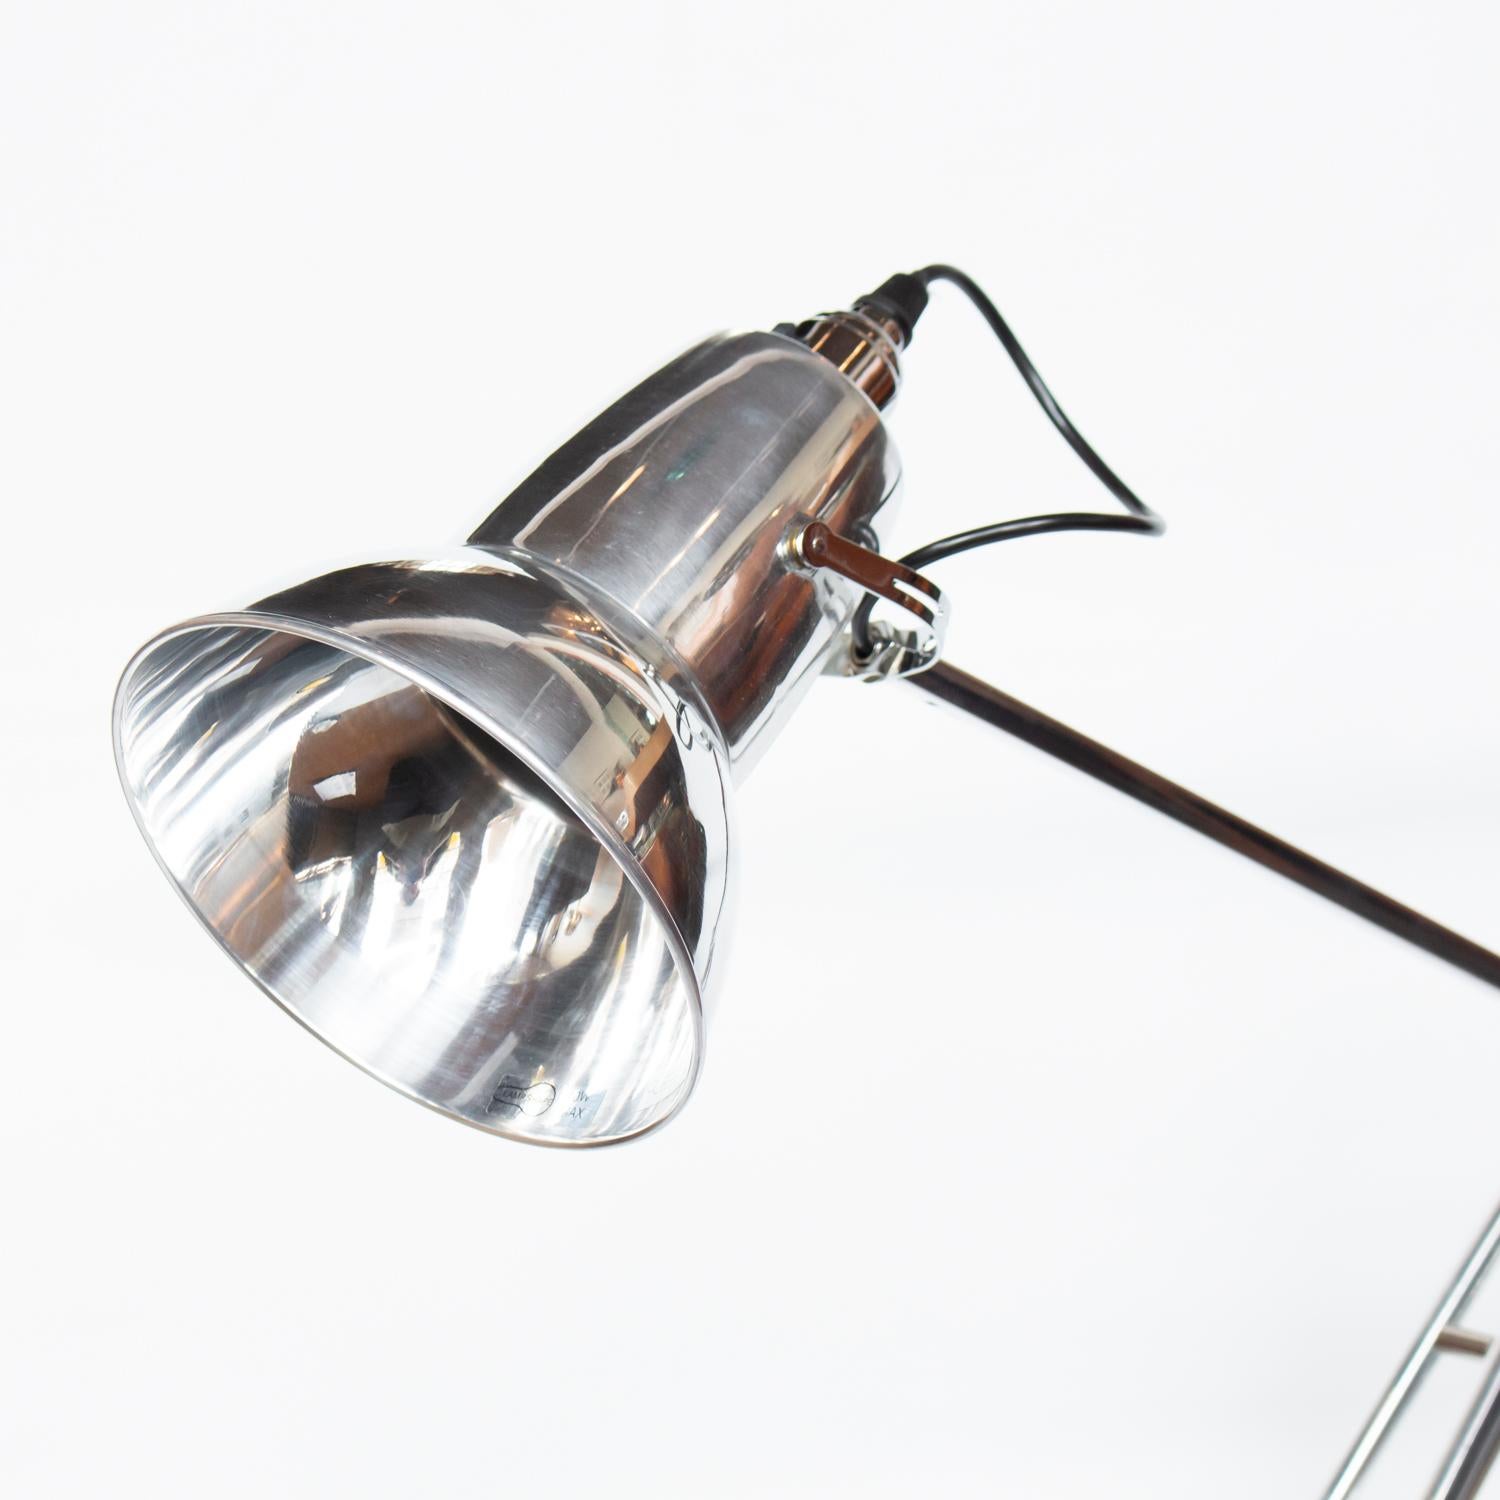 A chromed and polished metal counterpoise lamp by Herbert Terry & Sons. 

Fully refurbished, re-wired and re-chromed. Some replacement parts.

Dimensions: Base W 15 cm, D 15 cm, L arm extended 71 cm, shade H 13.5 cm, D 12.5 cm

Origin: